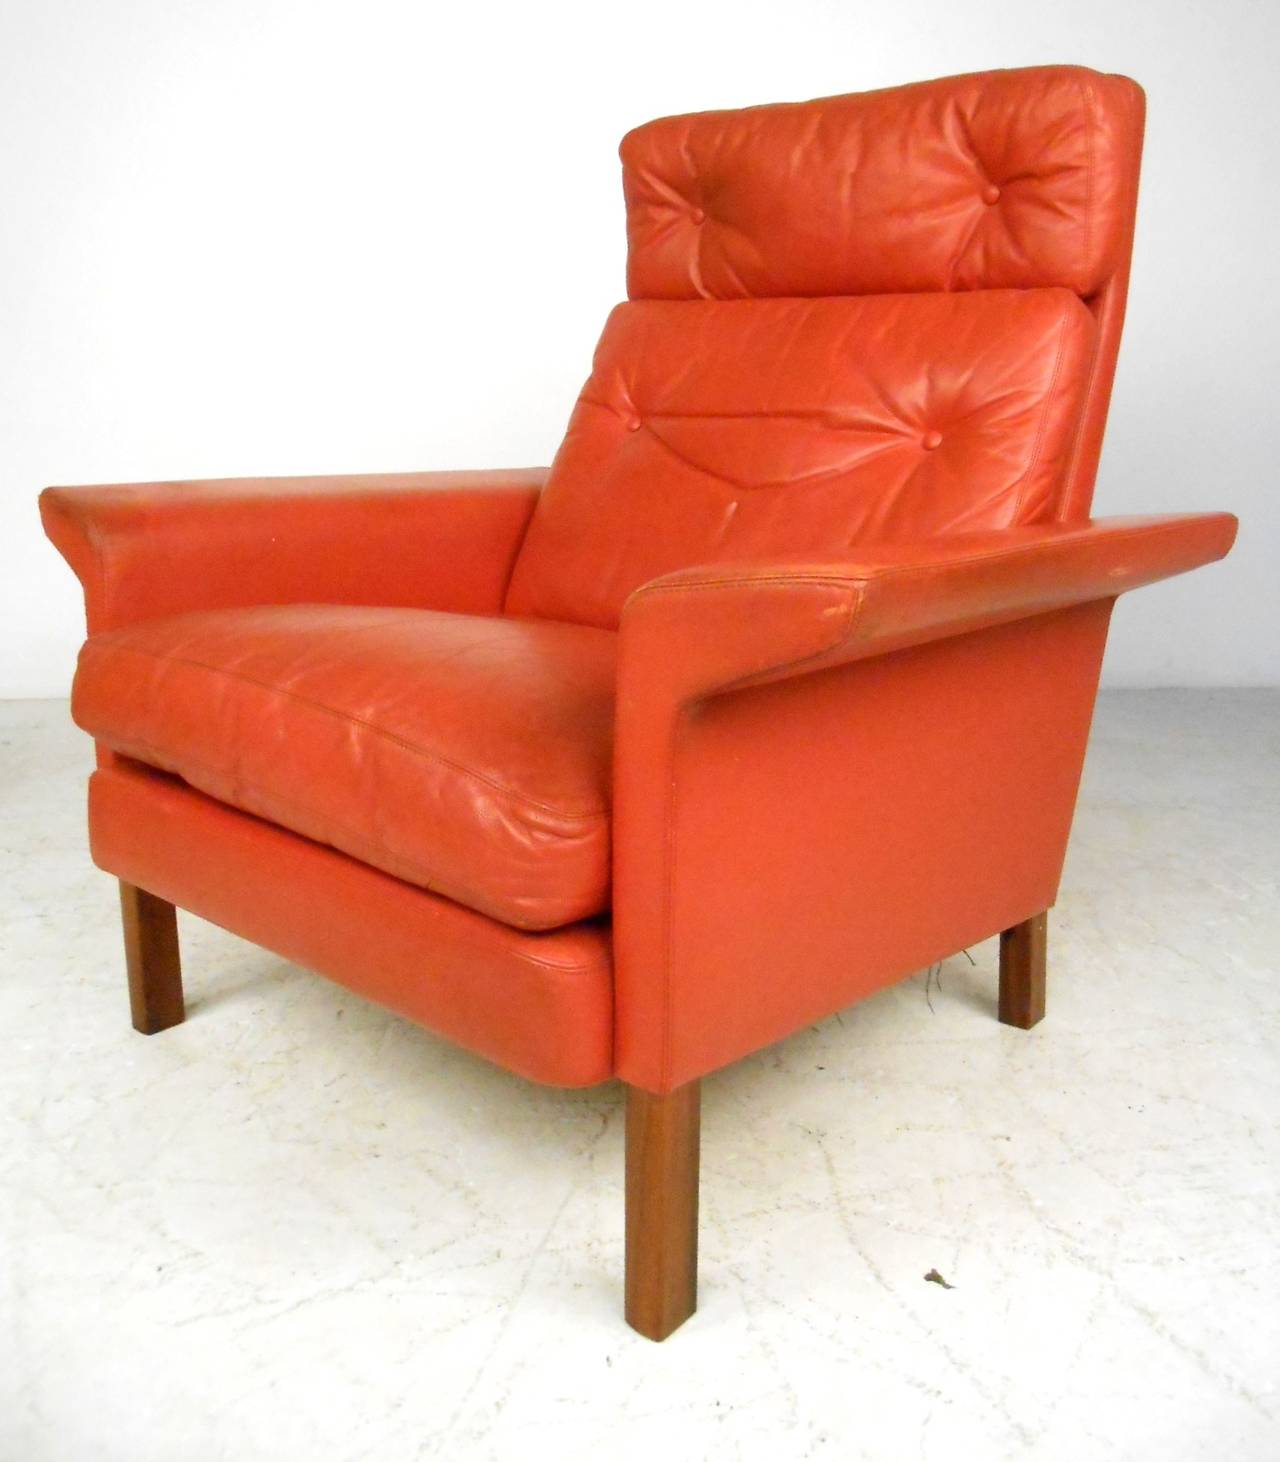 This beautiful vintage leather lounge chair comes with matching ottoman, and feature the unique wide sculpted armrests made famous by Danish designer Hans Olsen. Quality Mid-Century construction makes this a unique addition to any interior. Please